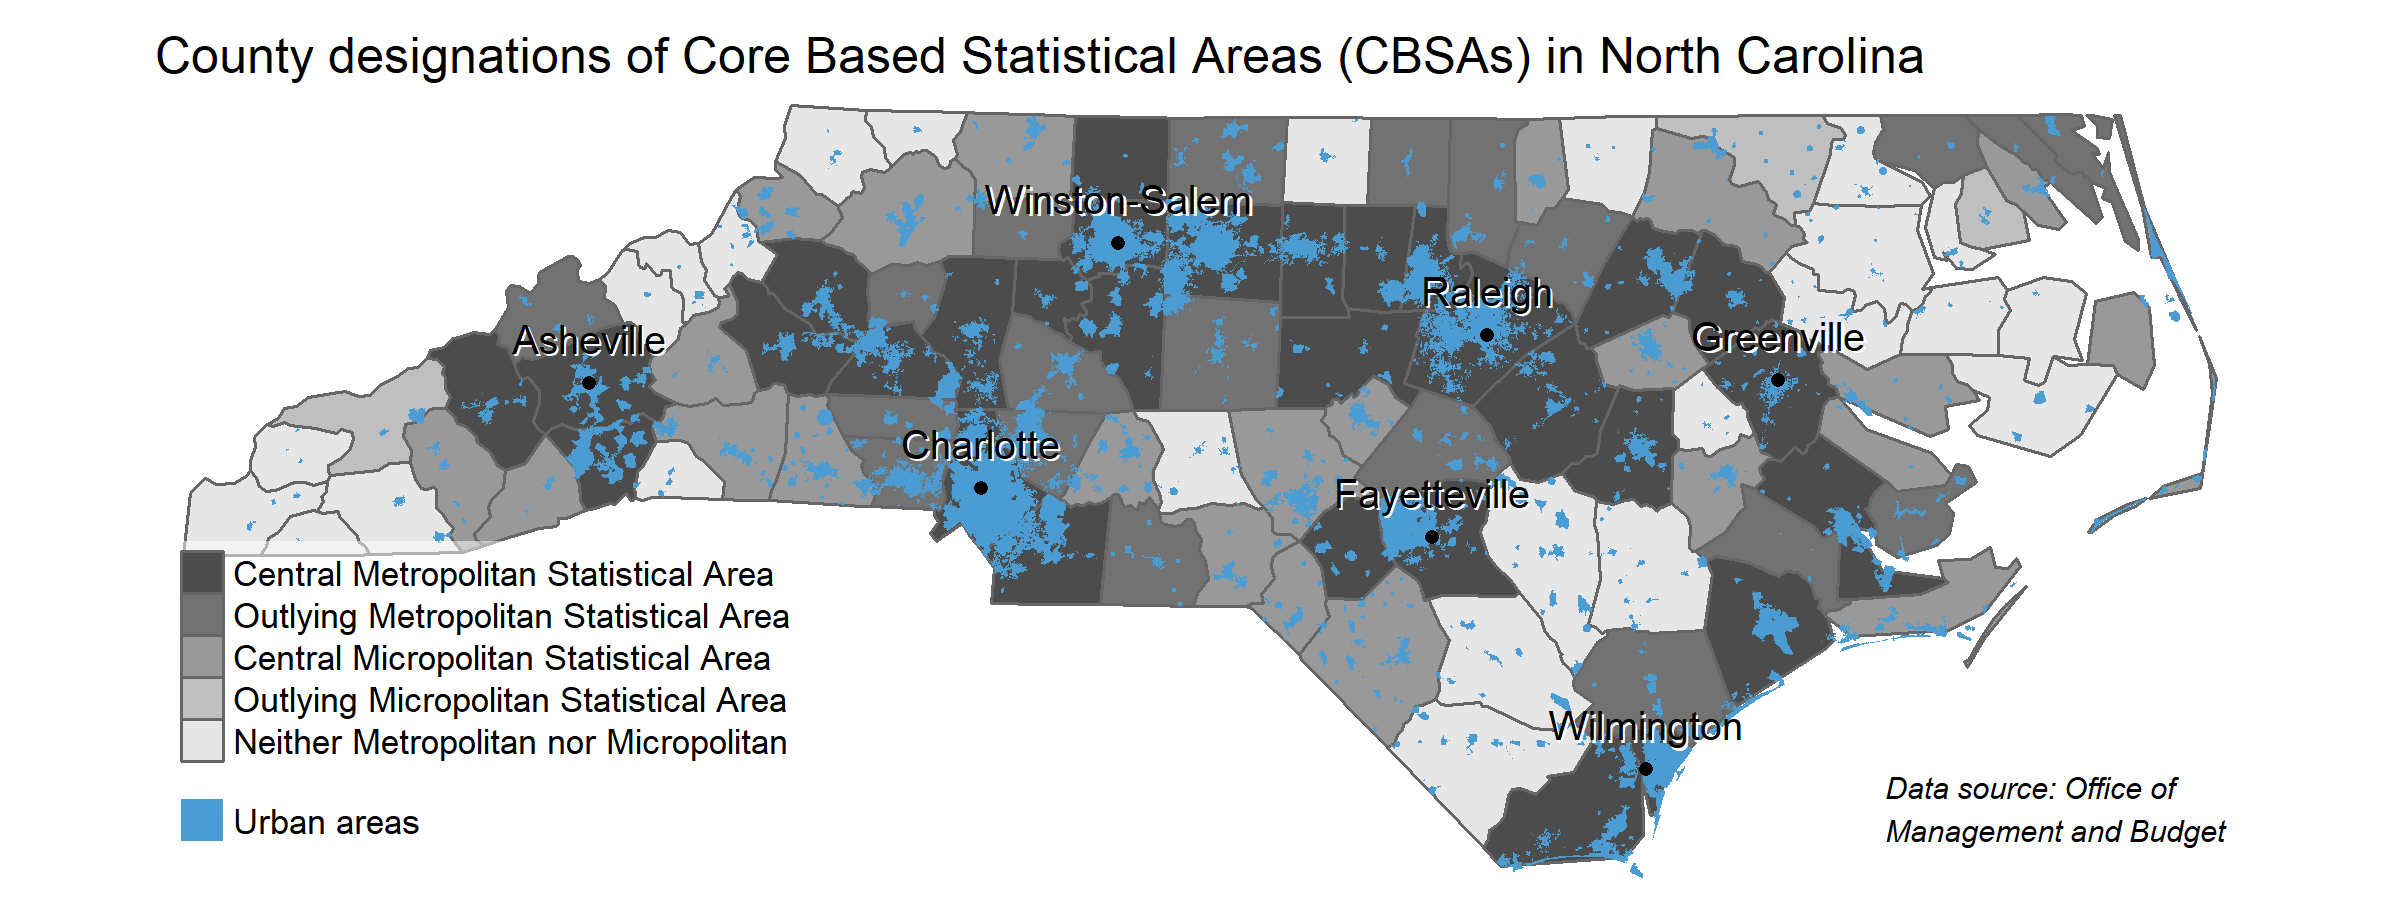 A map demonstrating which North Carolina Counties fall into the following set of categories: Central Metropolitan Statistical Areas, Outlying Metropolitan Statistical Areas, Central Micropolitan Statistical Areas, Outlying Micropolitan Statistical Areas, and Neither Metropolitan nor Micropolitan. The map also includes dot symbols that represent high population density areas.